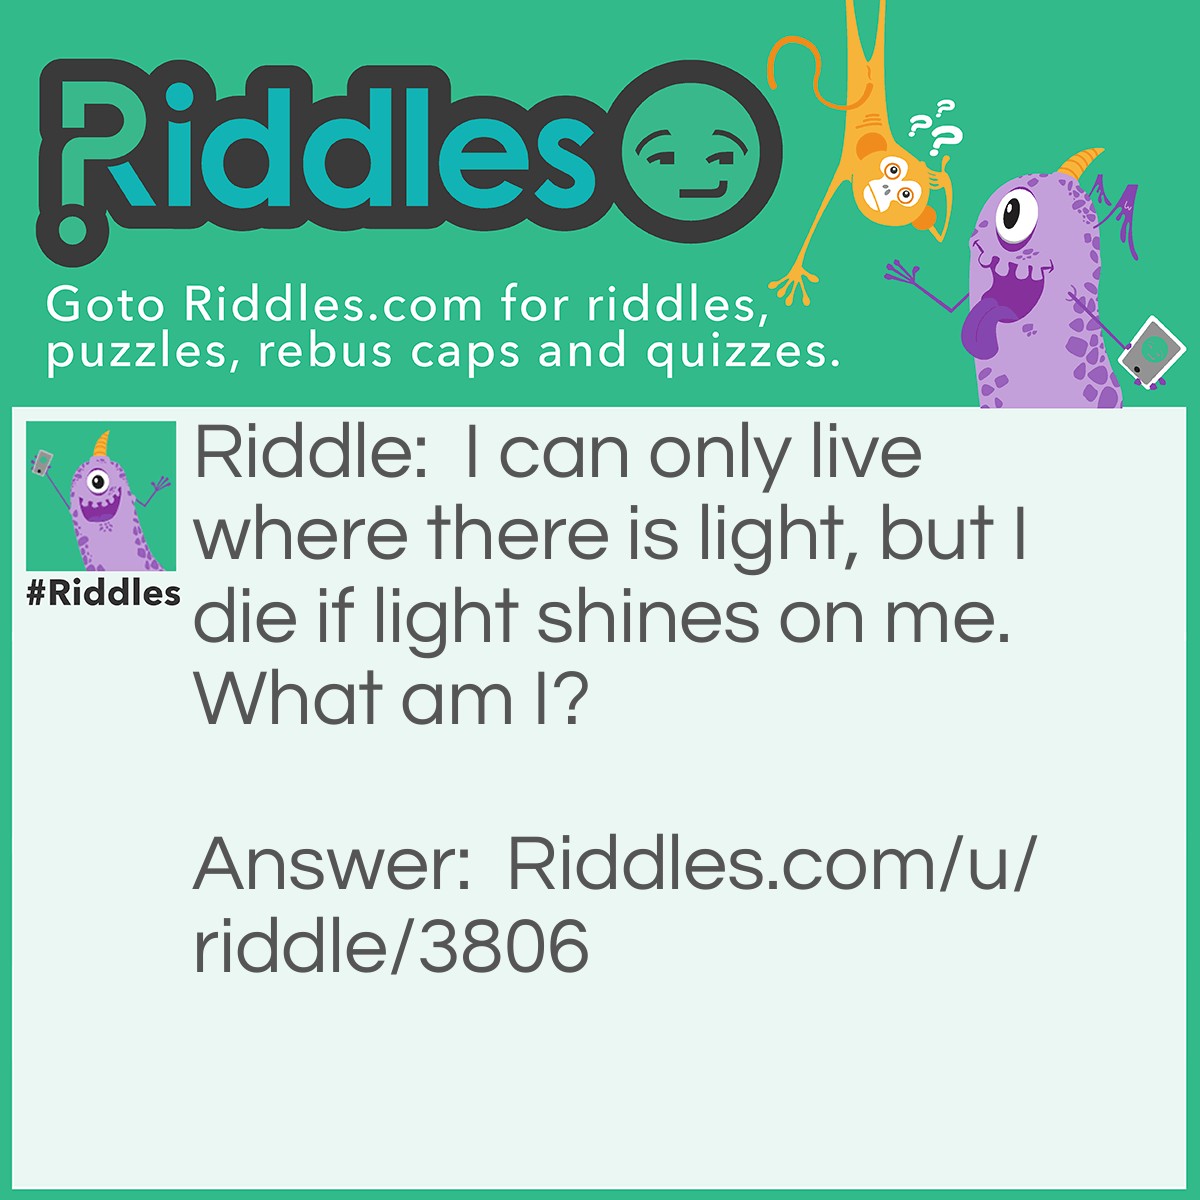 Riddle: I can only live where there is light, but I die if light shines on me. What am I? Answer: A shadow.